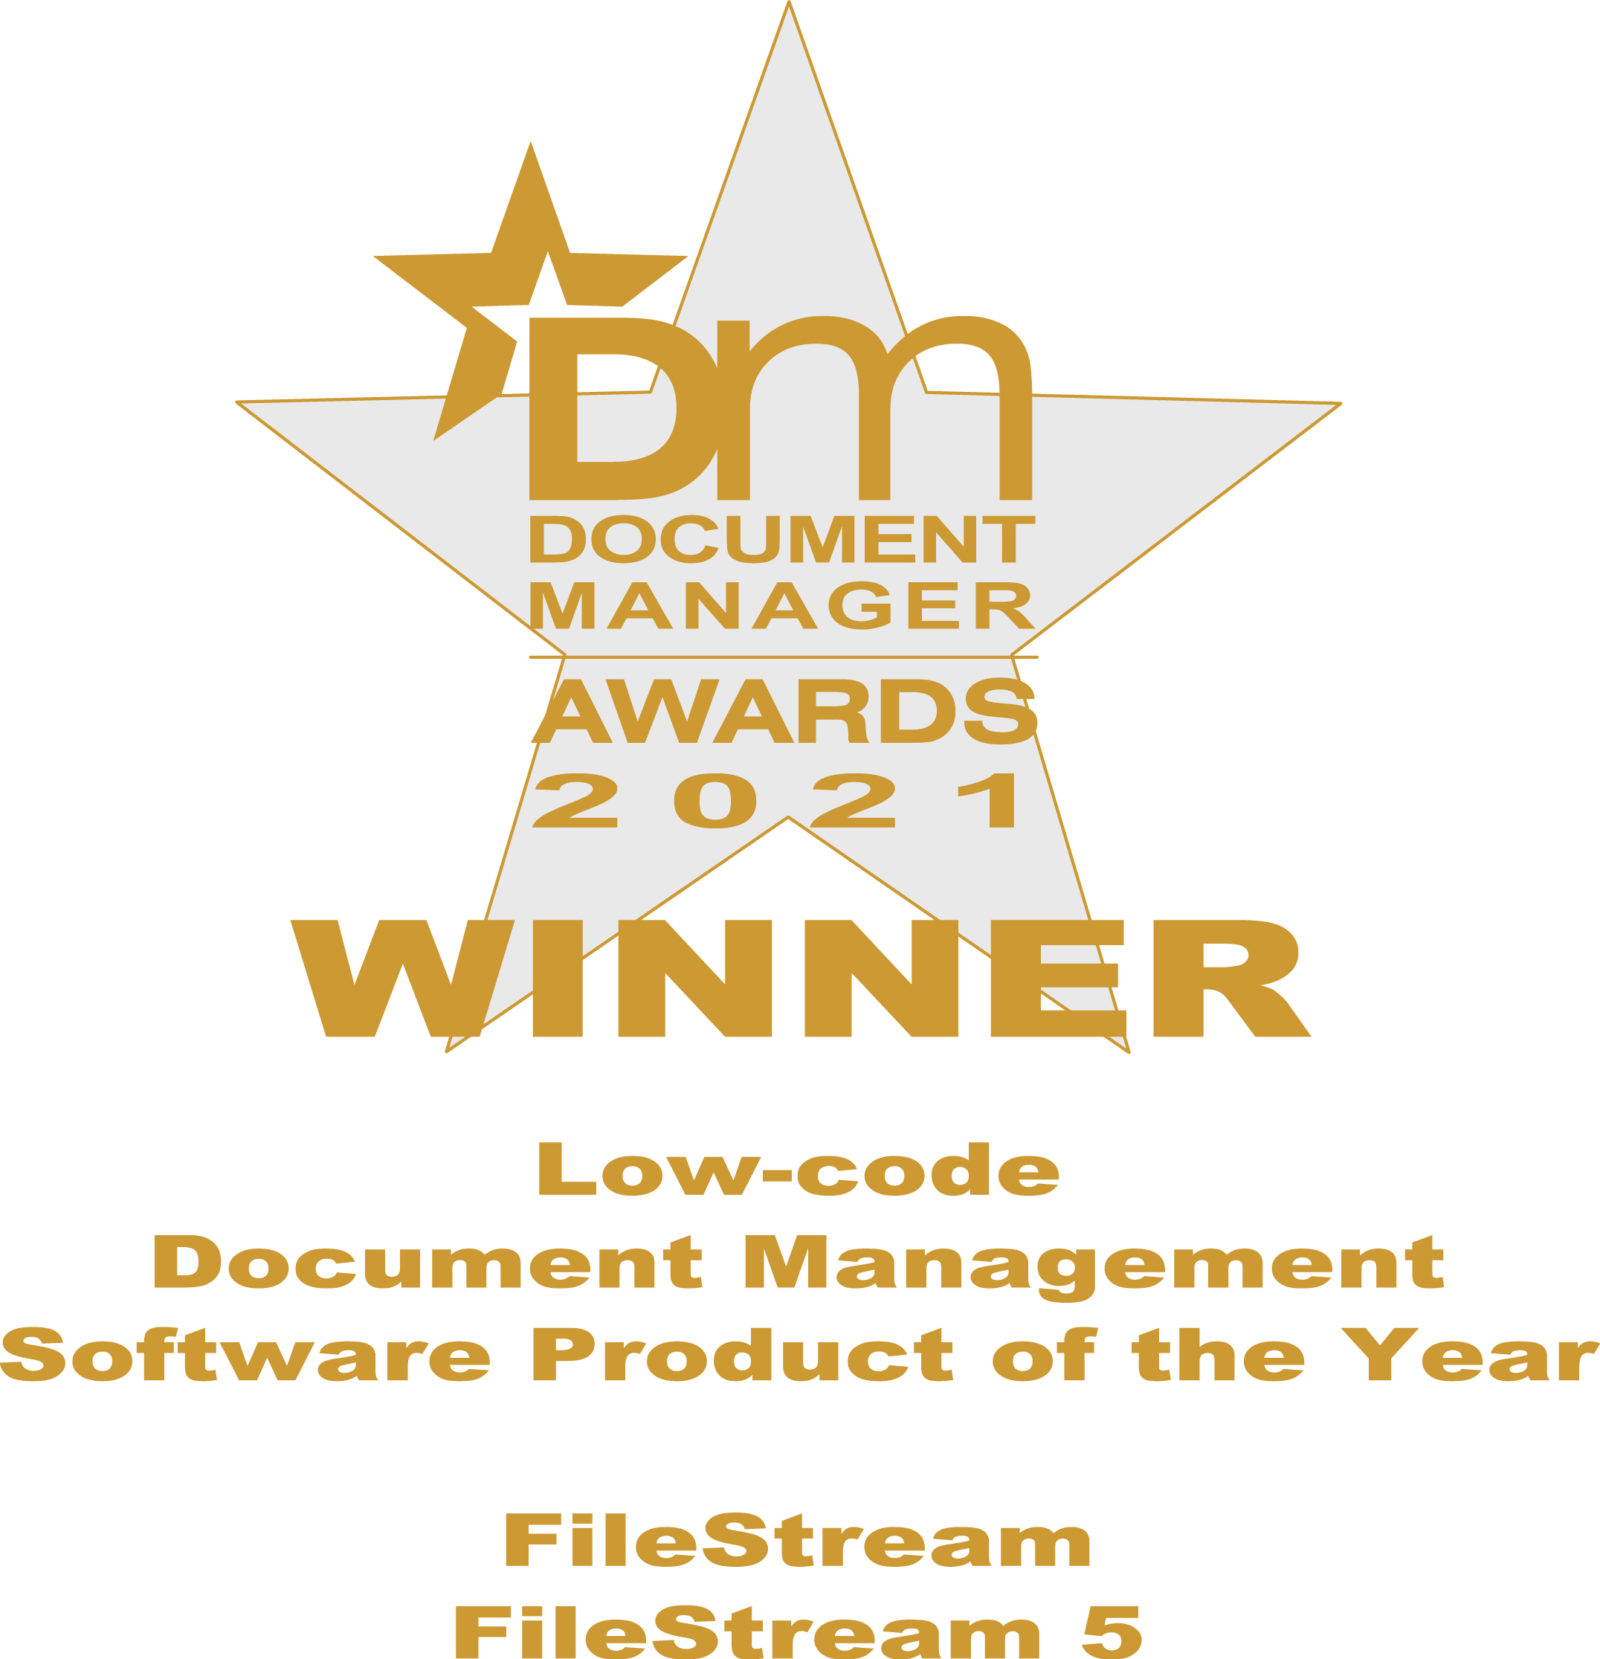 Low-code Document Management Software Product of the Year